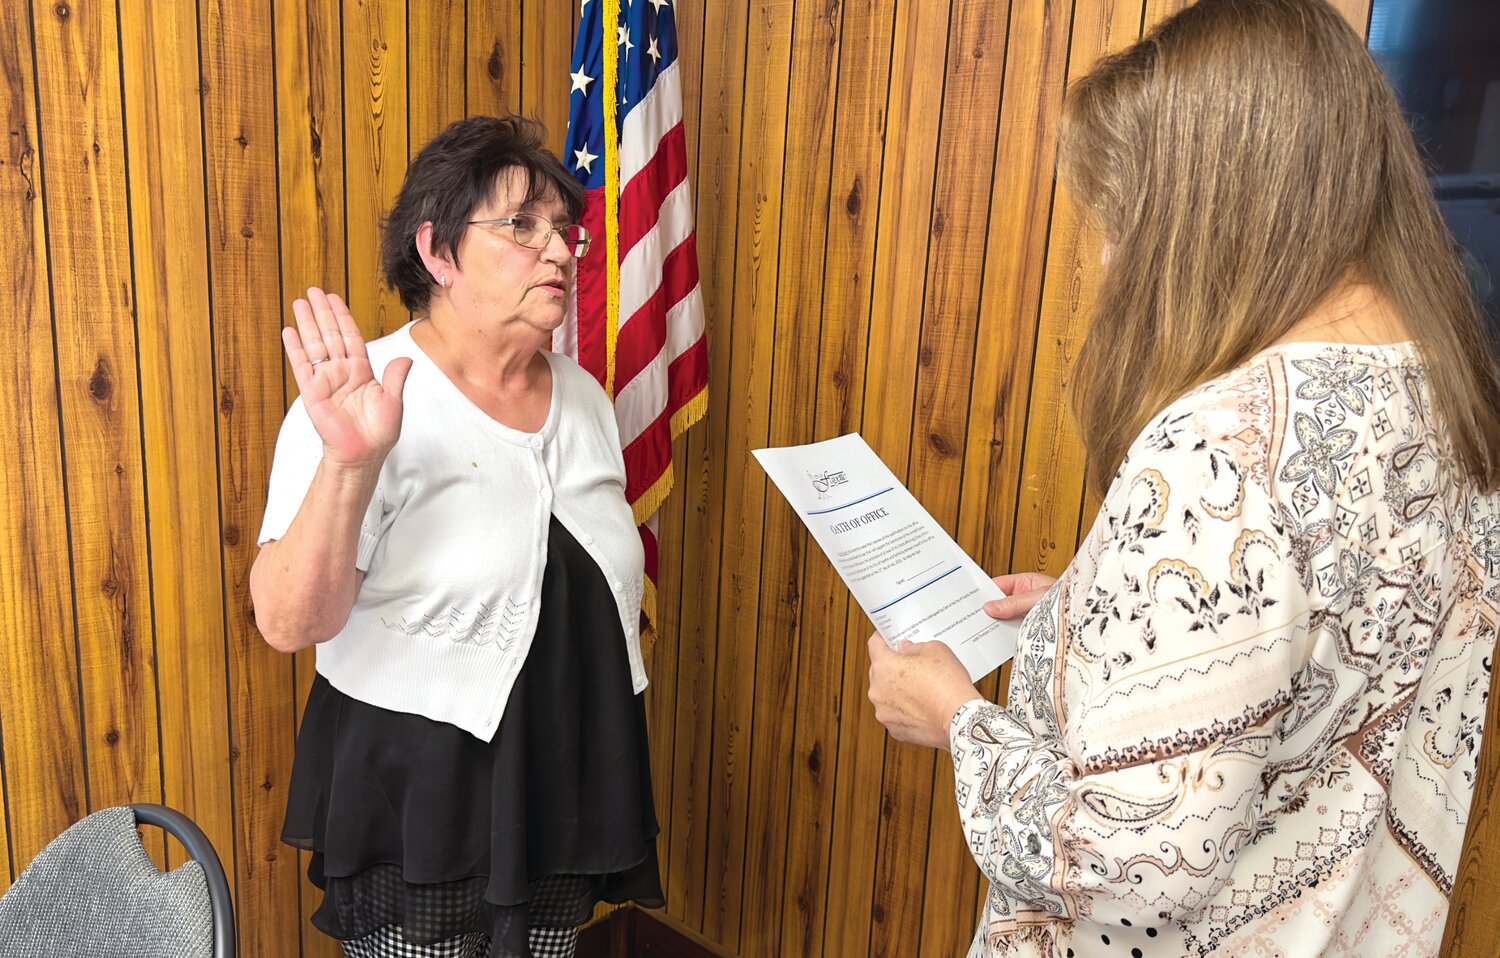 Ronda Gerlt is sworn-in as East Ward Alderwoman last week by Fayette City Clerk Judy Thompson. Her appointment by Mayor Jeremy Dawson was approved unanimously by the remaining five members of the city council.